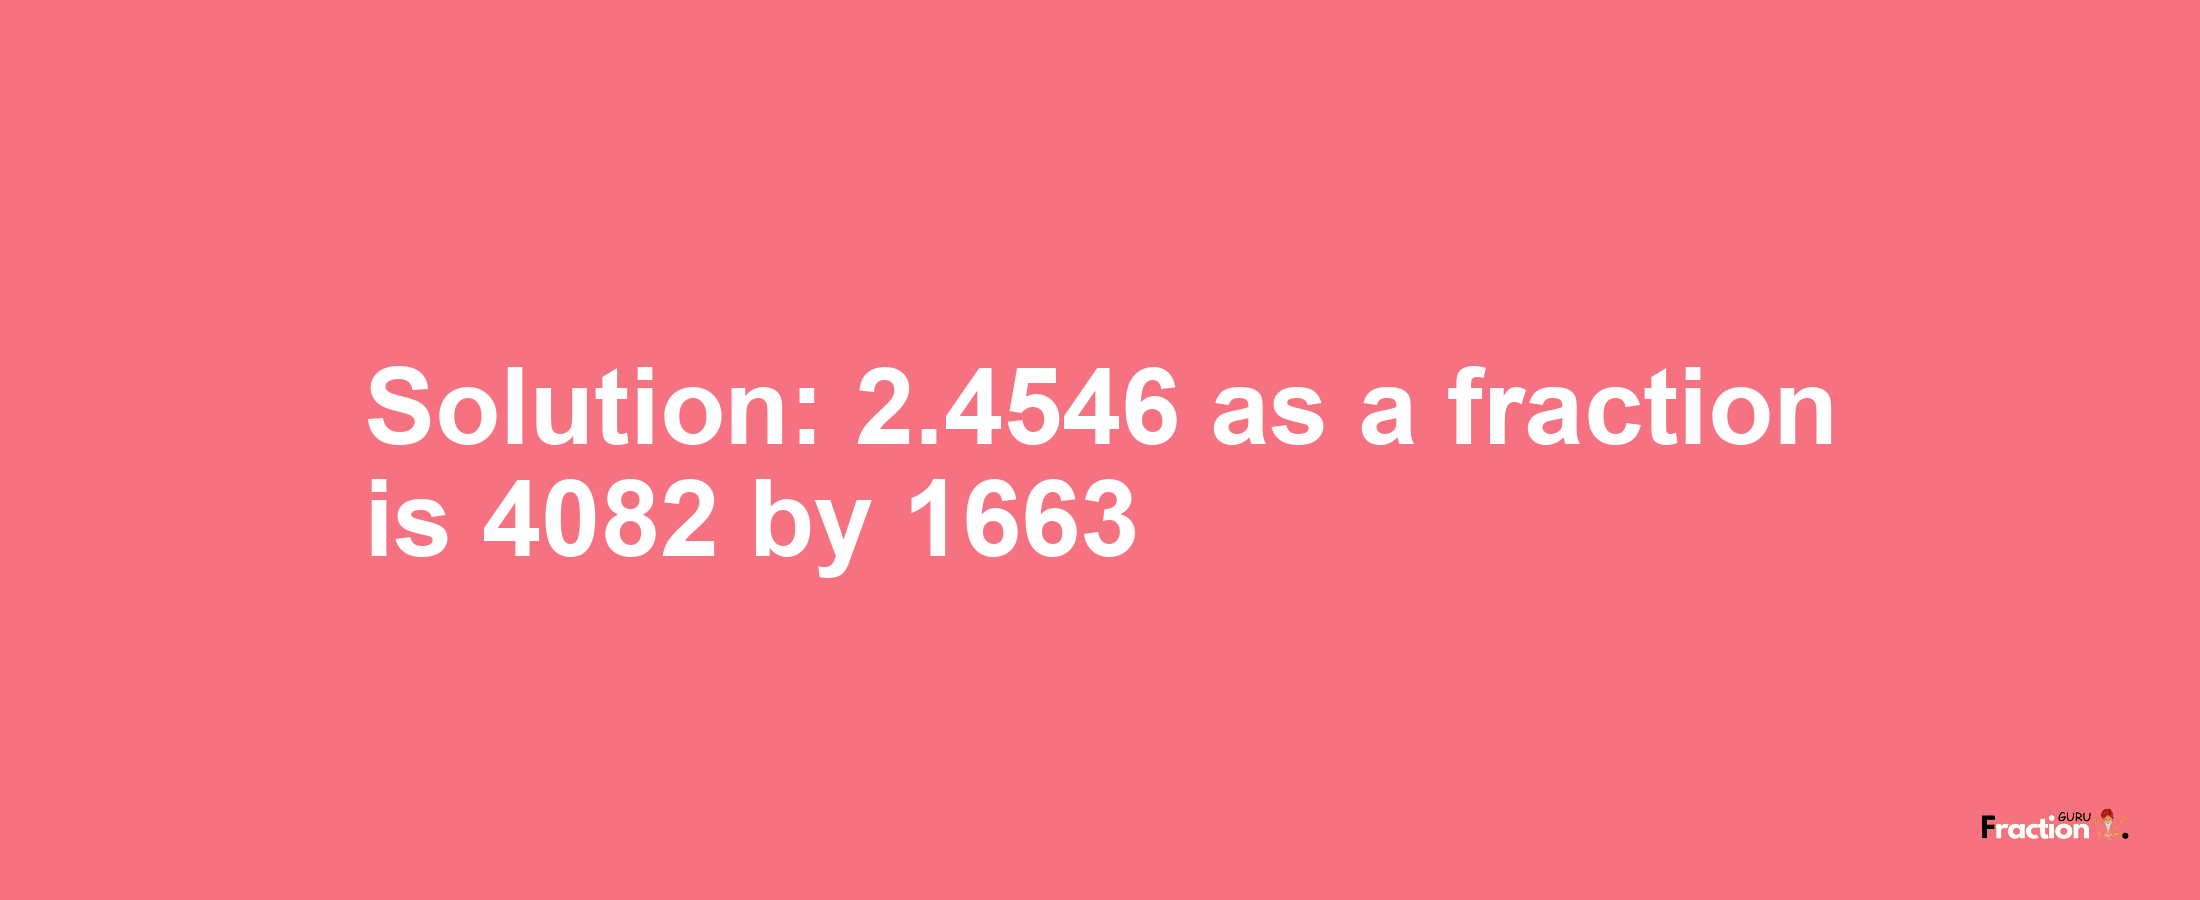 Solution:2.4546 as a fraction is 4082/1663